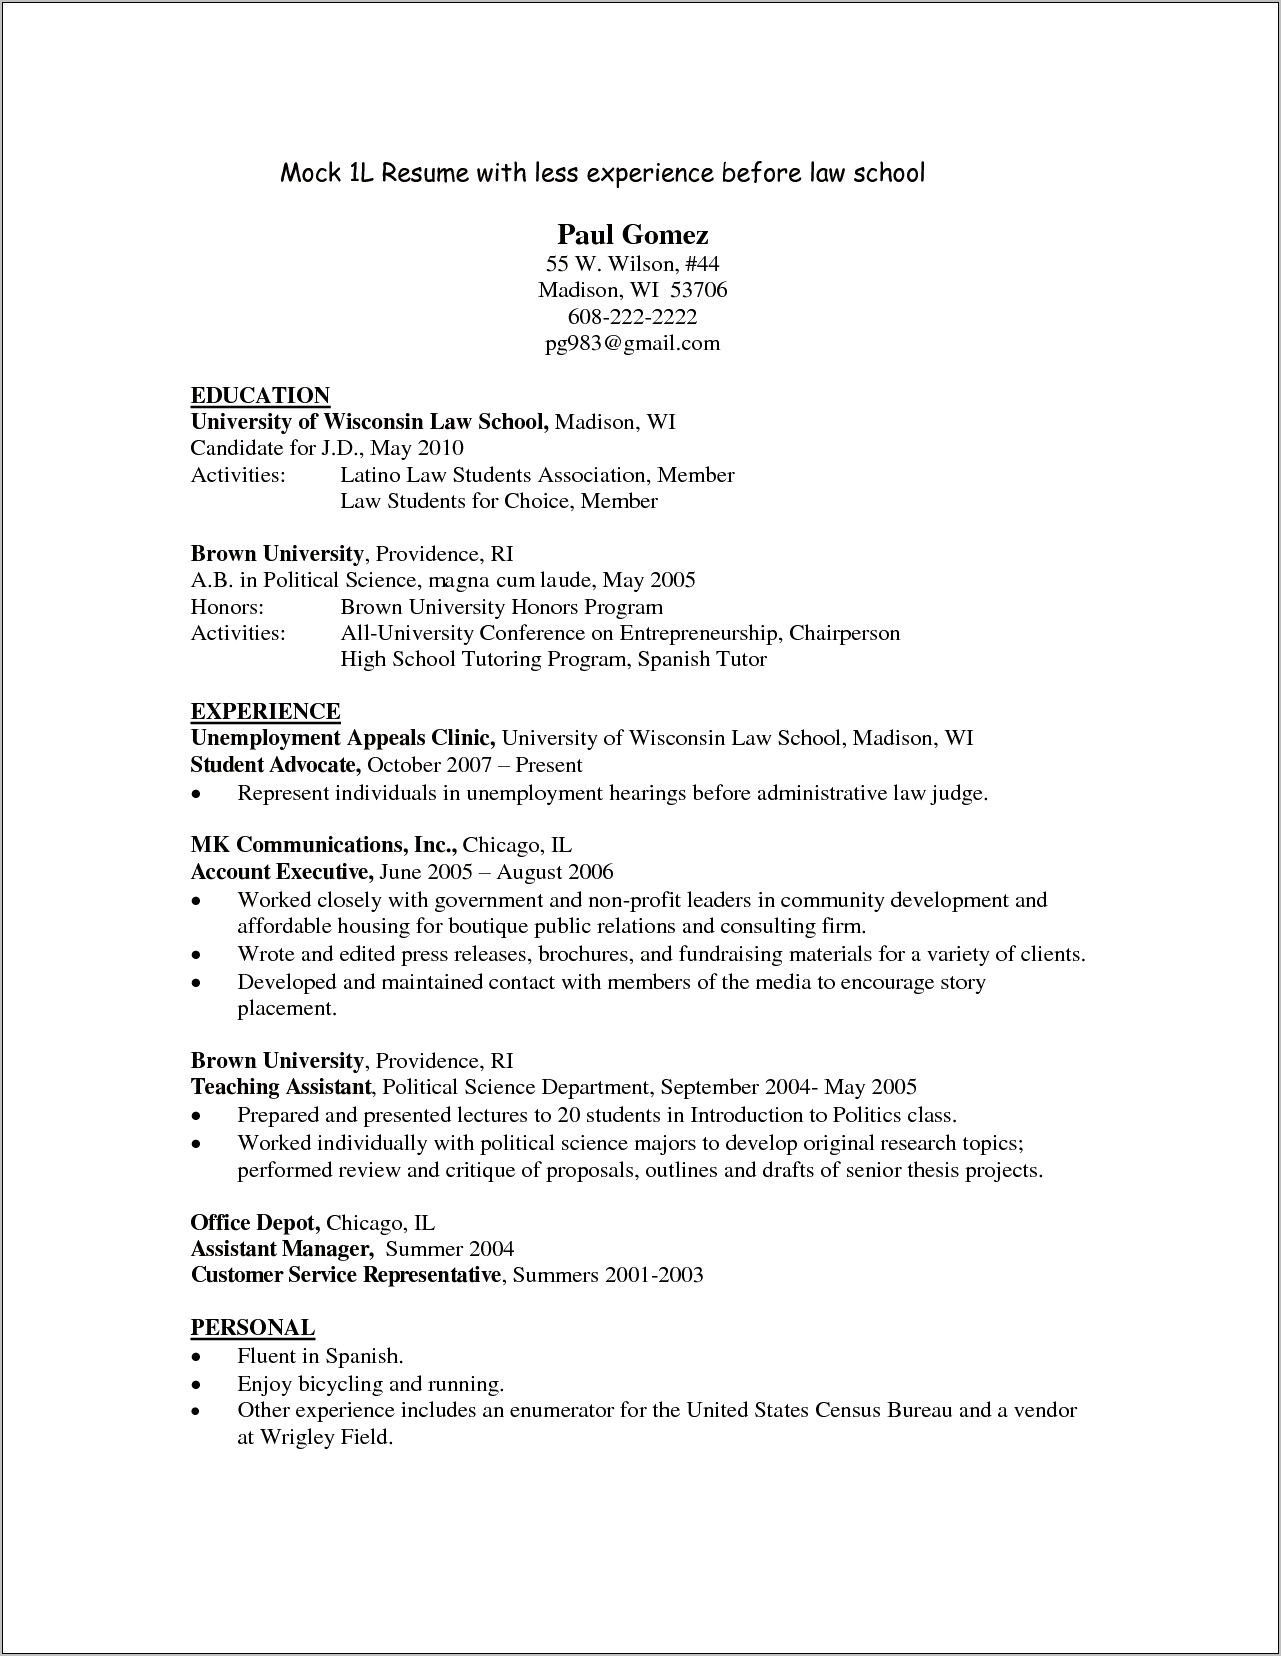 Resume Objective About Law School